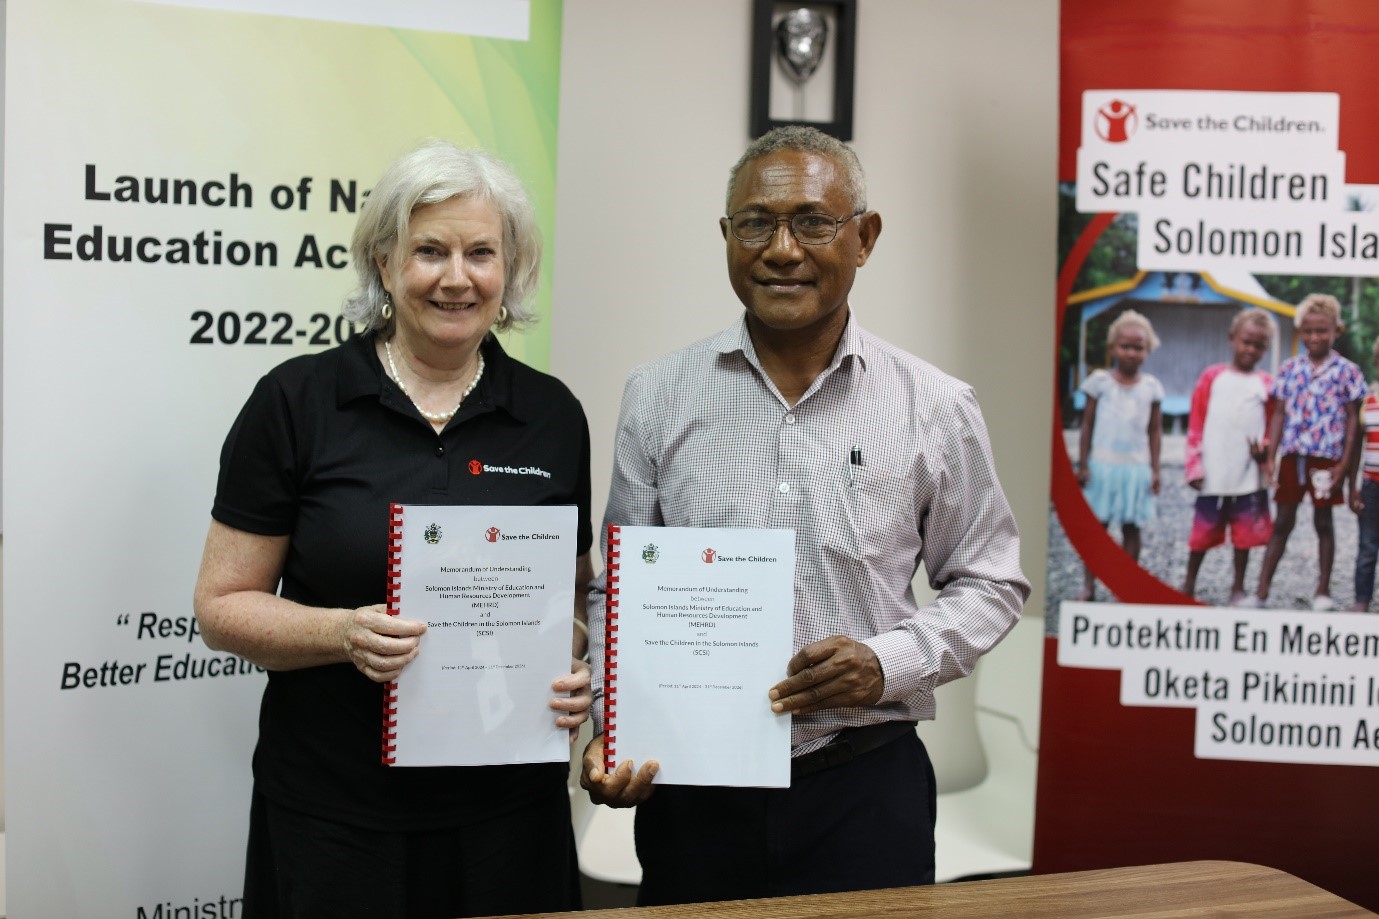 MEHRD formalizes a Memorandum of Agreement with Save the Children in the Solomon Islands